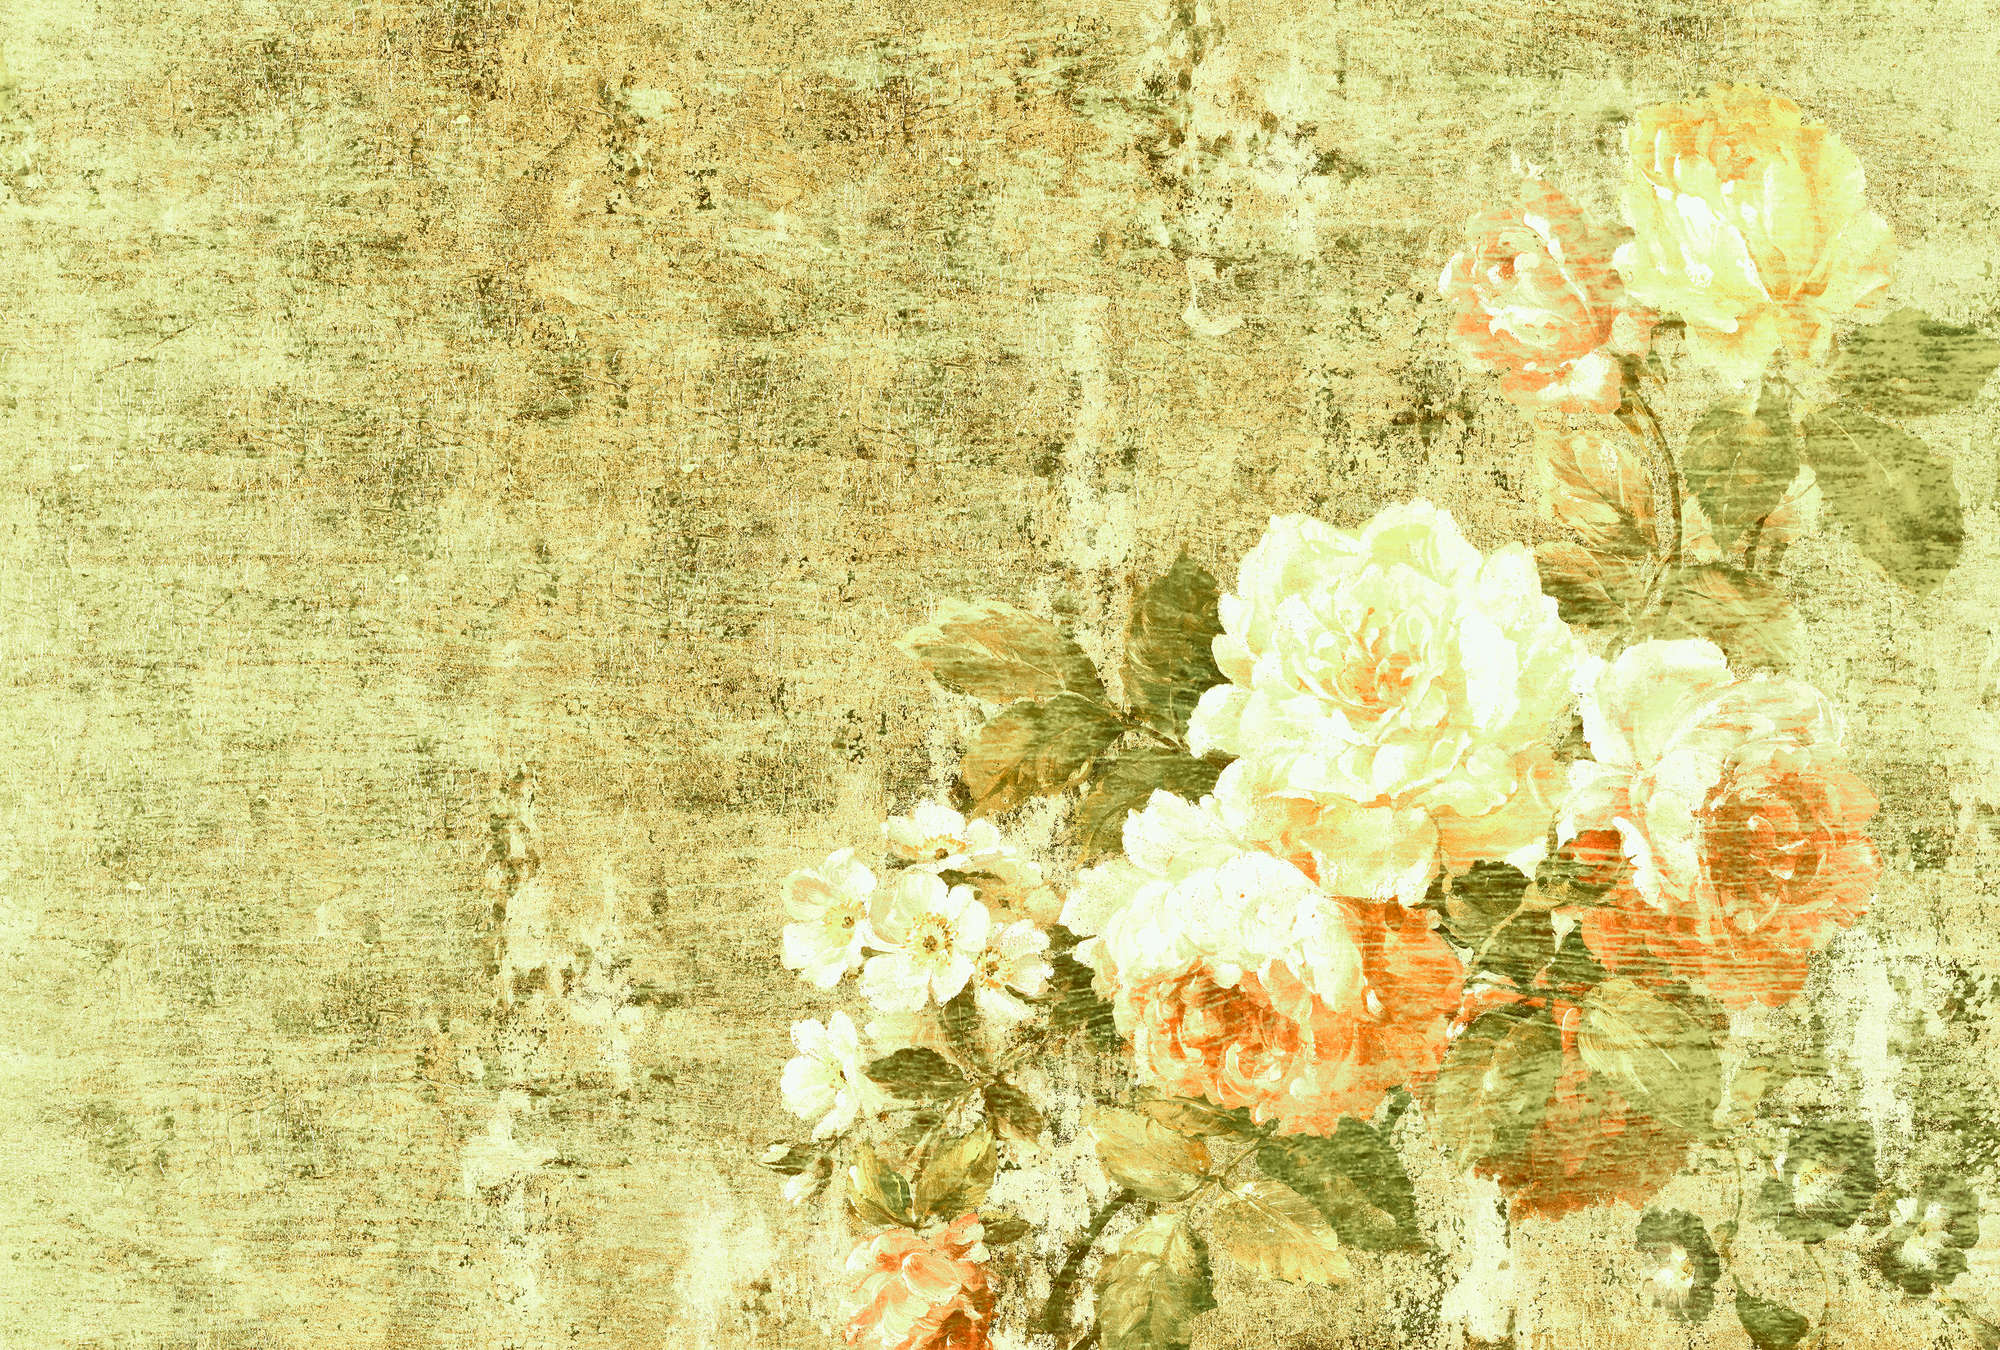             Photo wallpaper with roses in shabby chic style - green, pink, cream
        